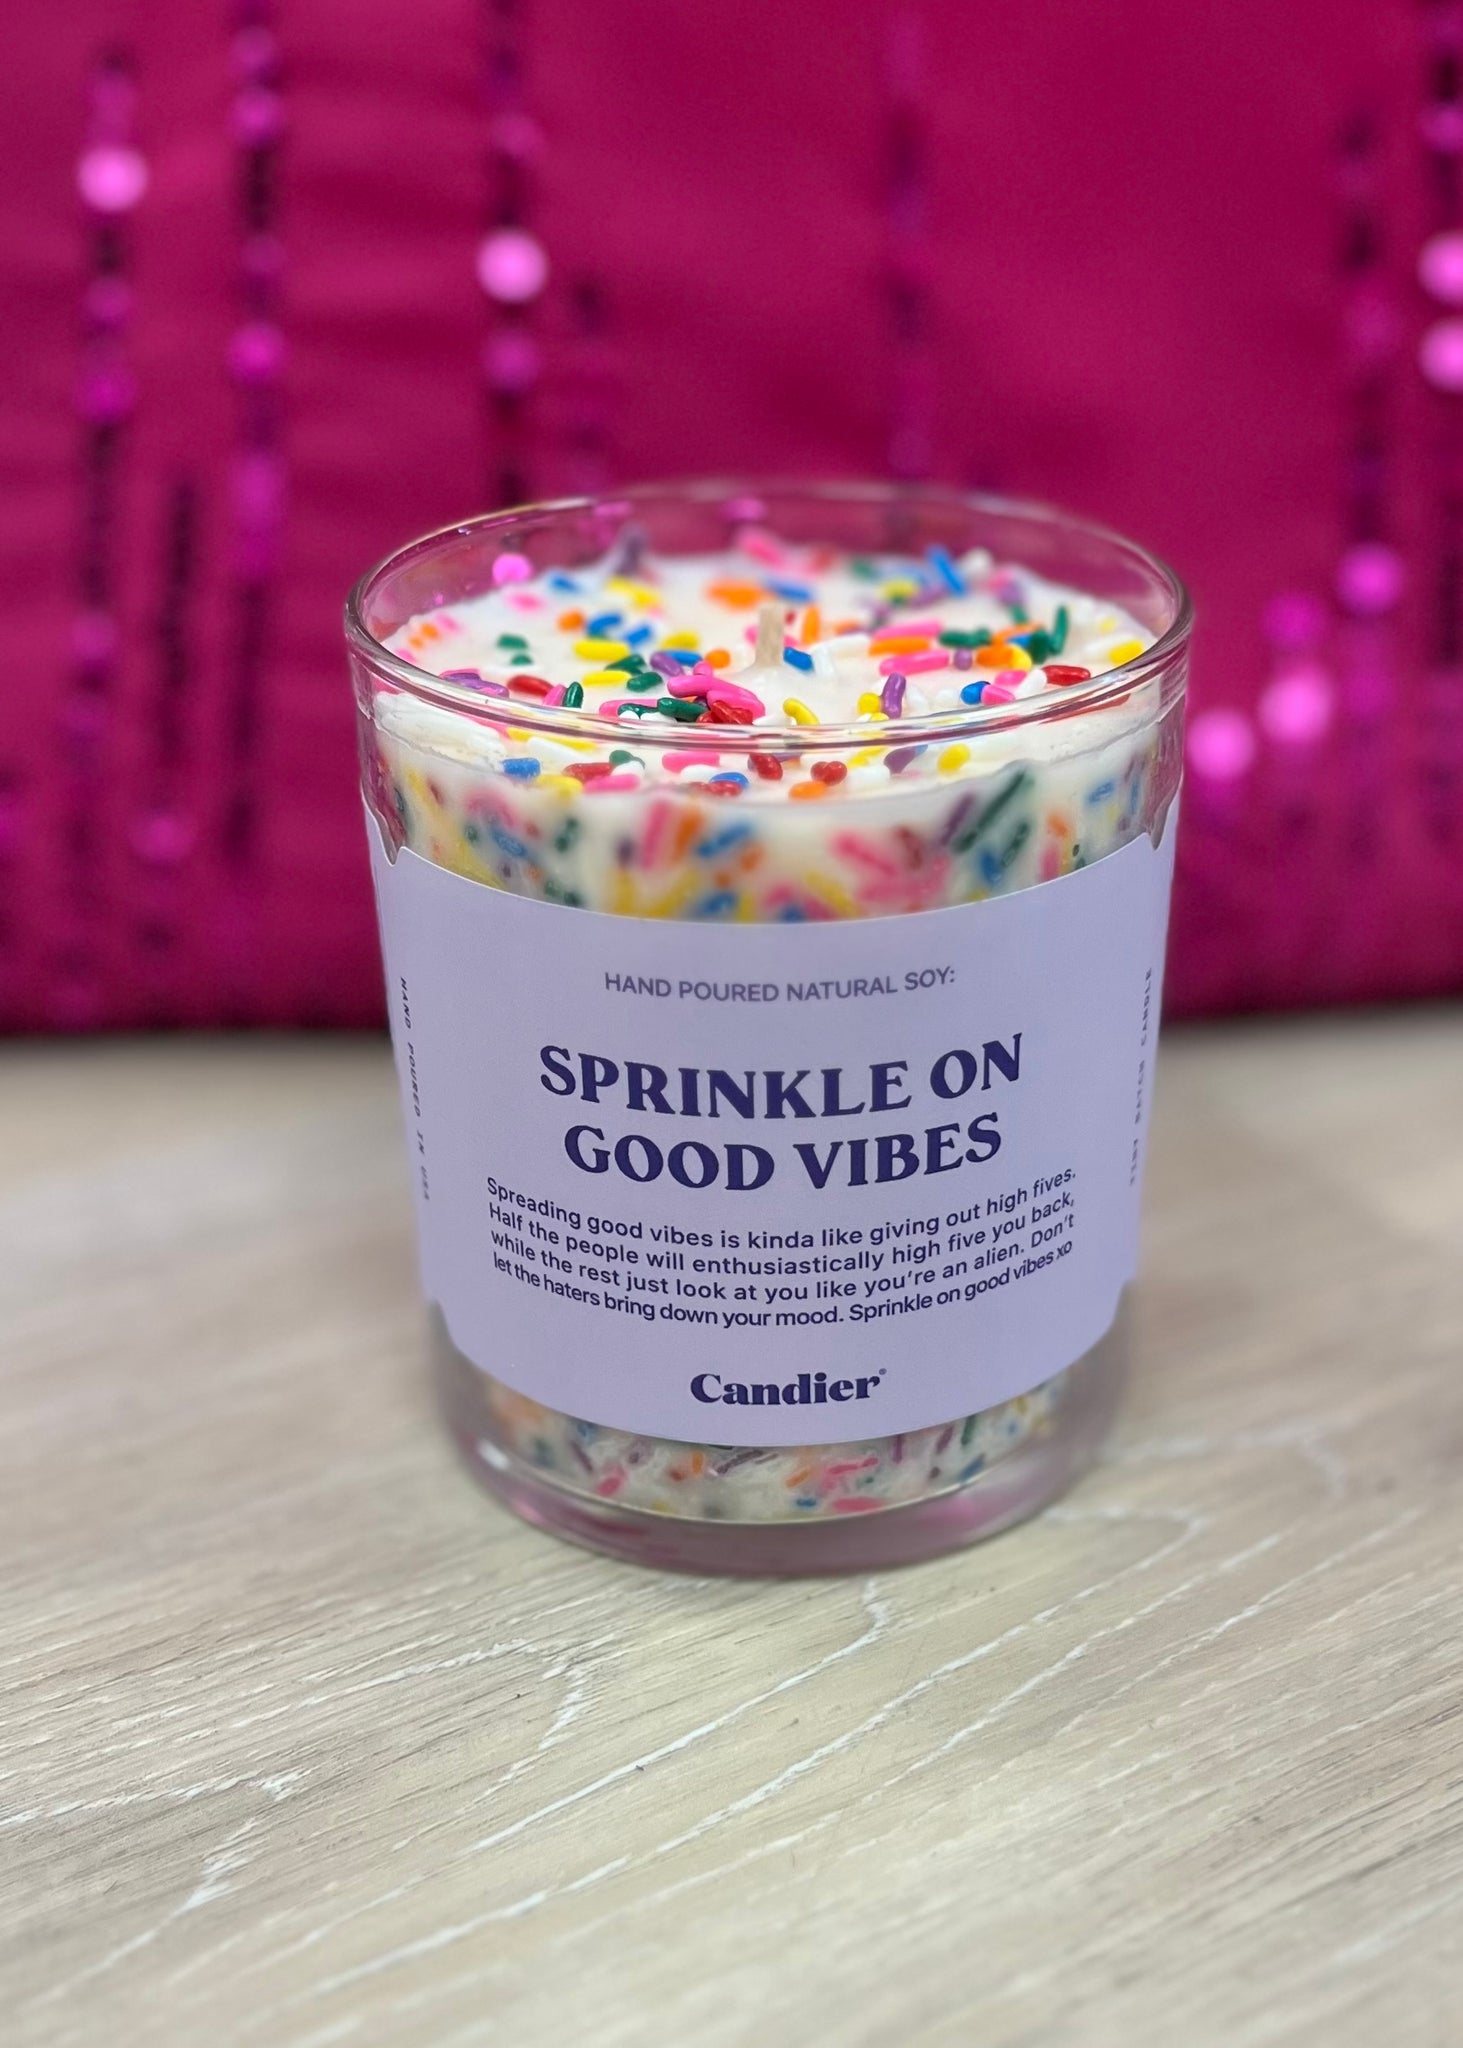 Candier Candles "Sprinkle Good Vibes"